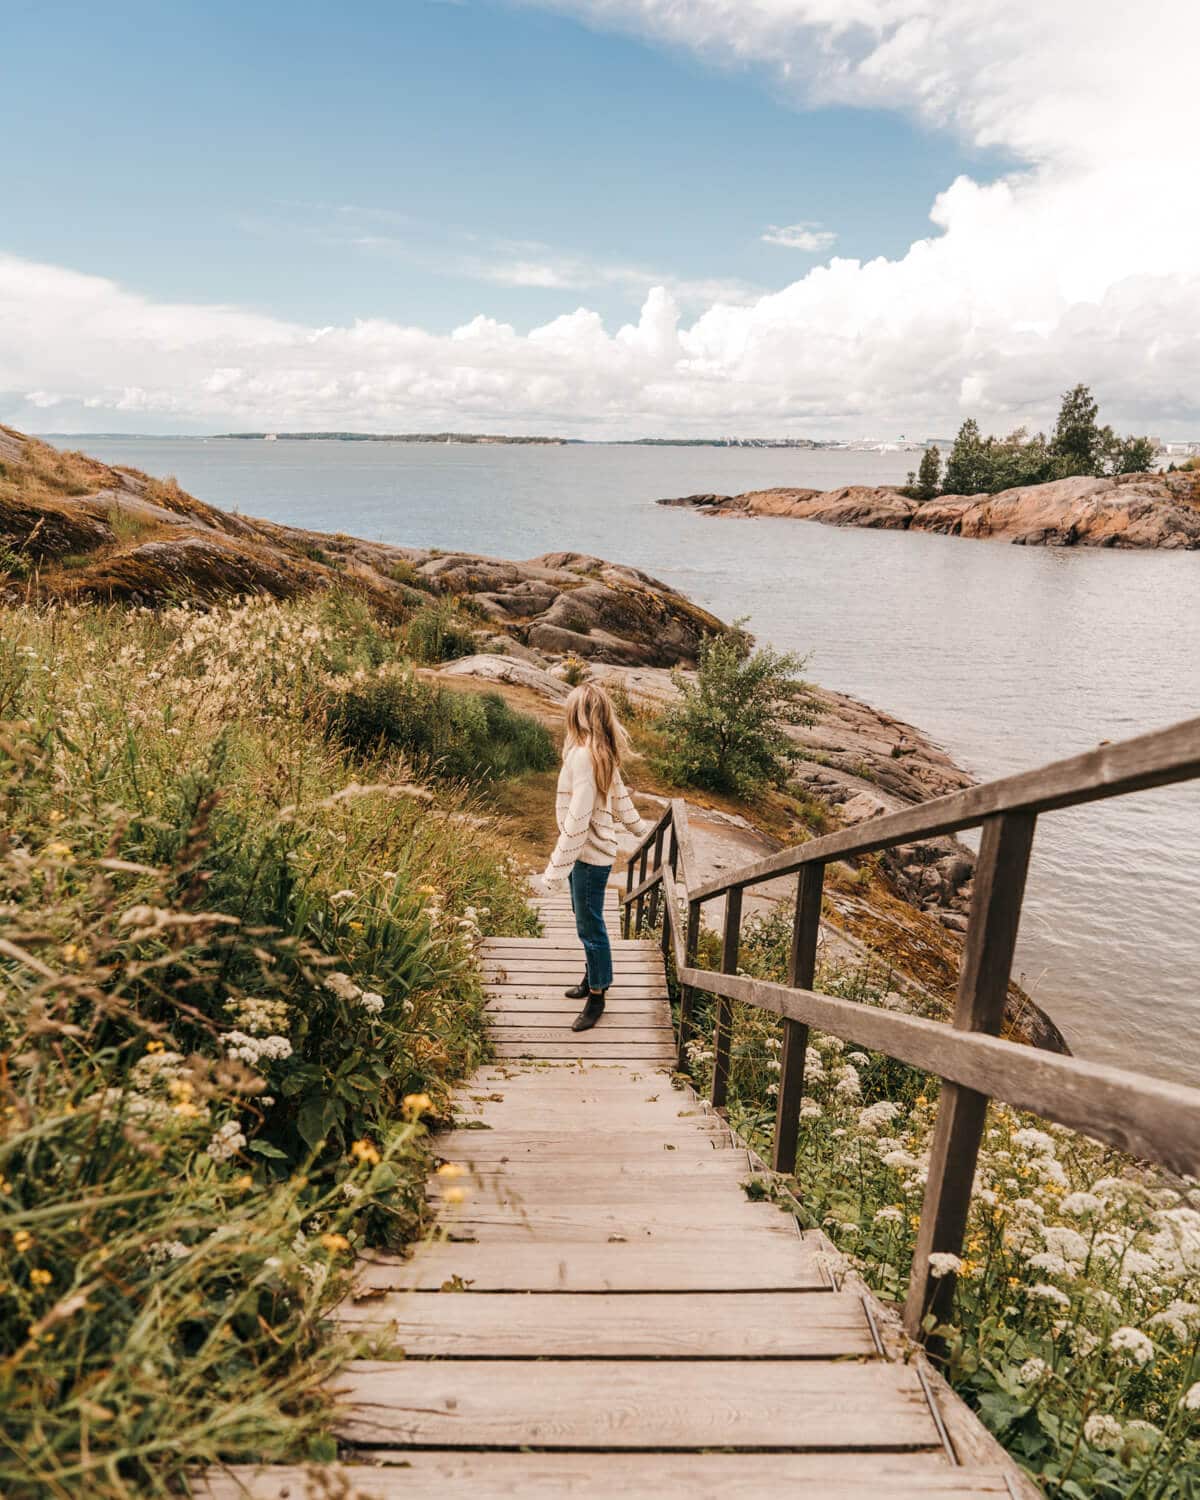 3 Day Helsinki Itinerary for First Timers - Suomenlinna Island